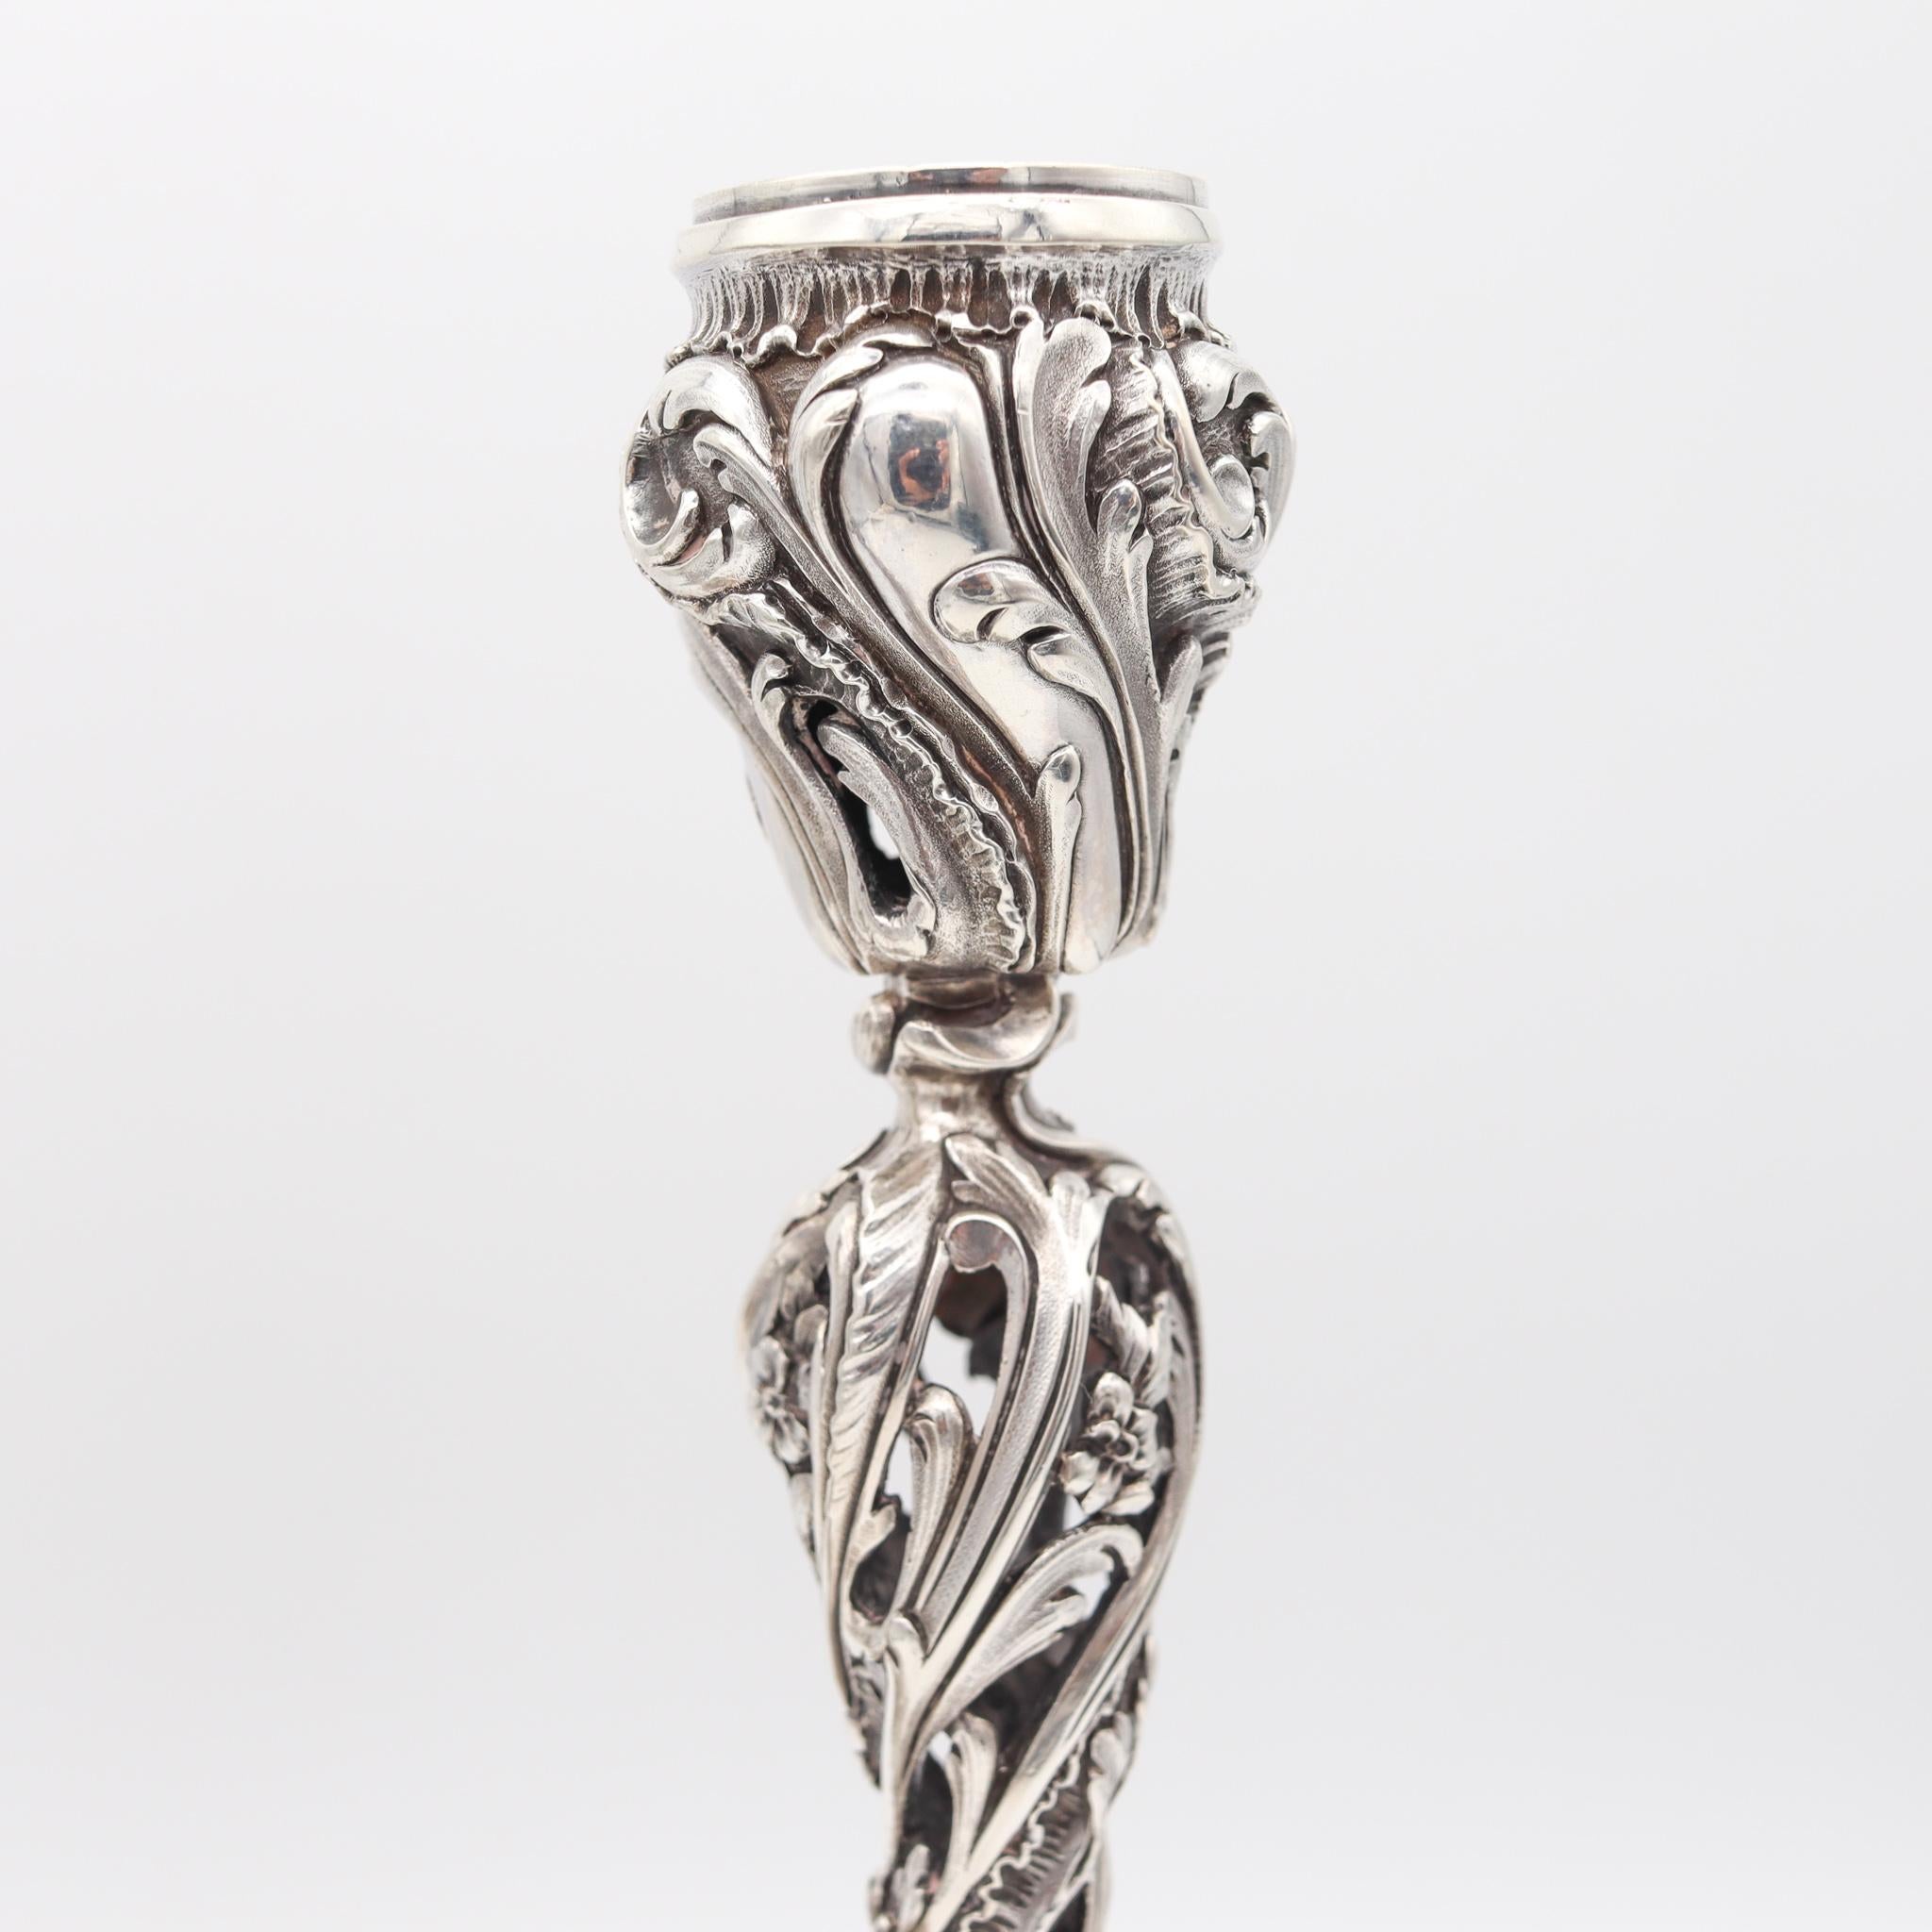 Hand-Crafted Charles Harleux 1895 Paris Art Nouveau Pair of Candlestick in Sterling Silver For Sale